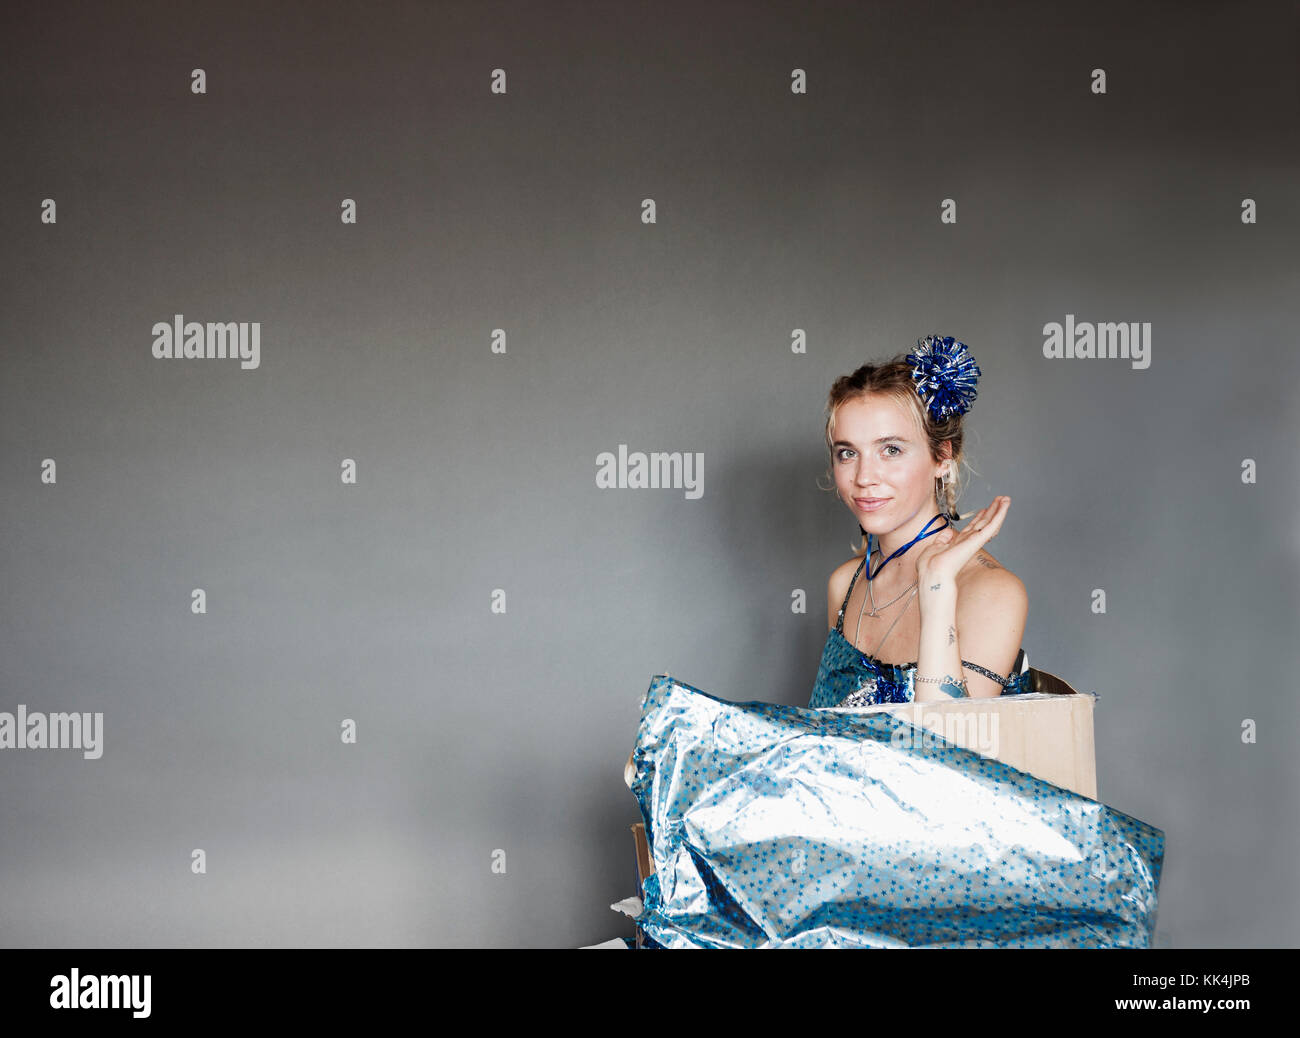 Young woman emerging from gift wrapped parcel cardboard box, with model release, London, 18/06/2017 Stock Photo